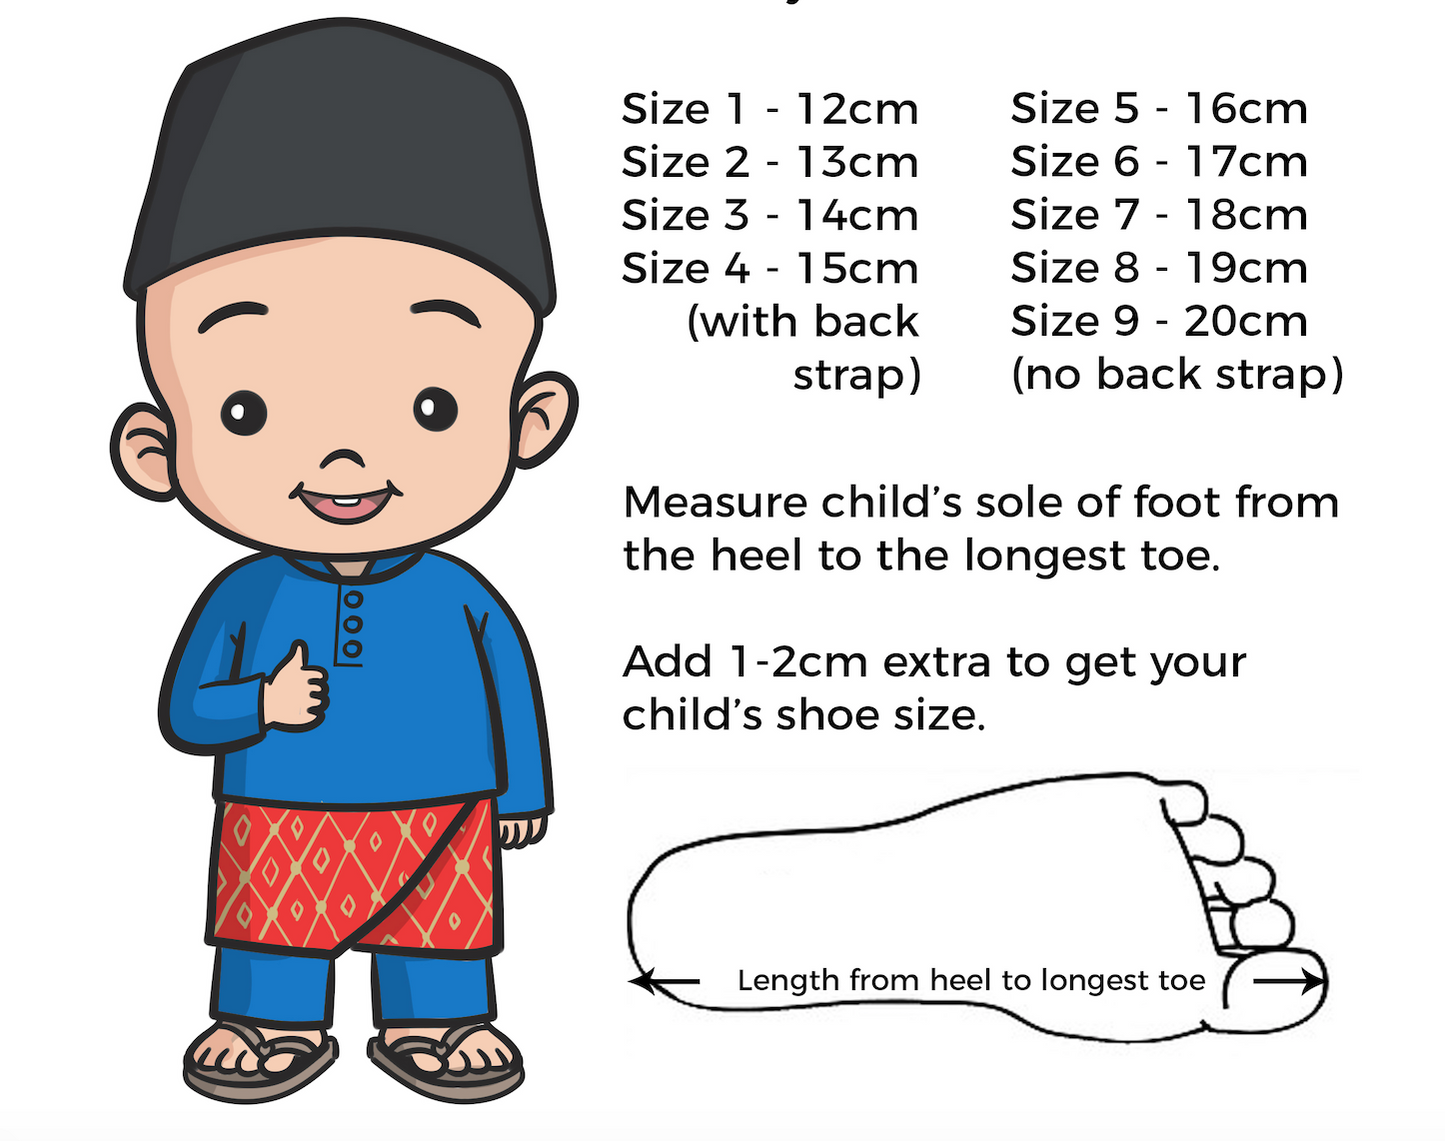 Kids Chapal Black Sole and Red Strap